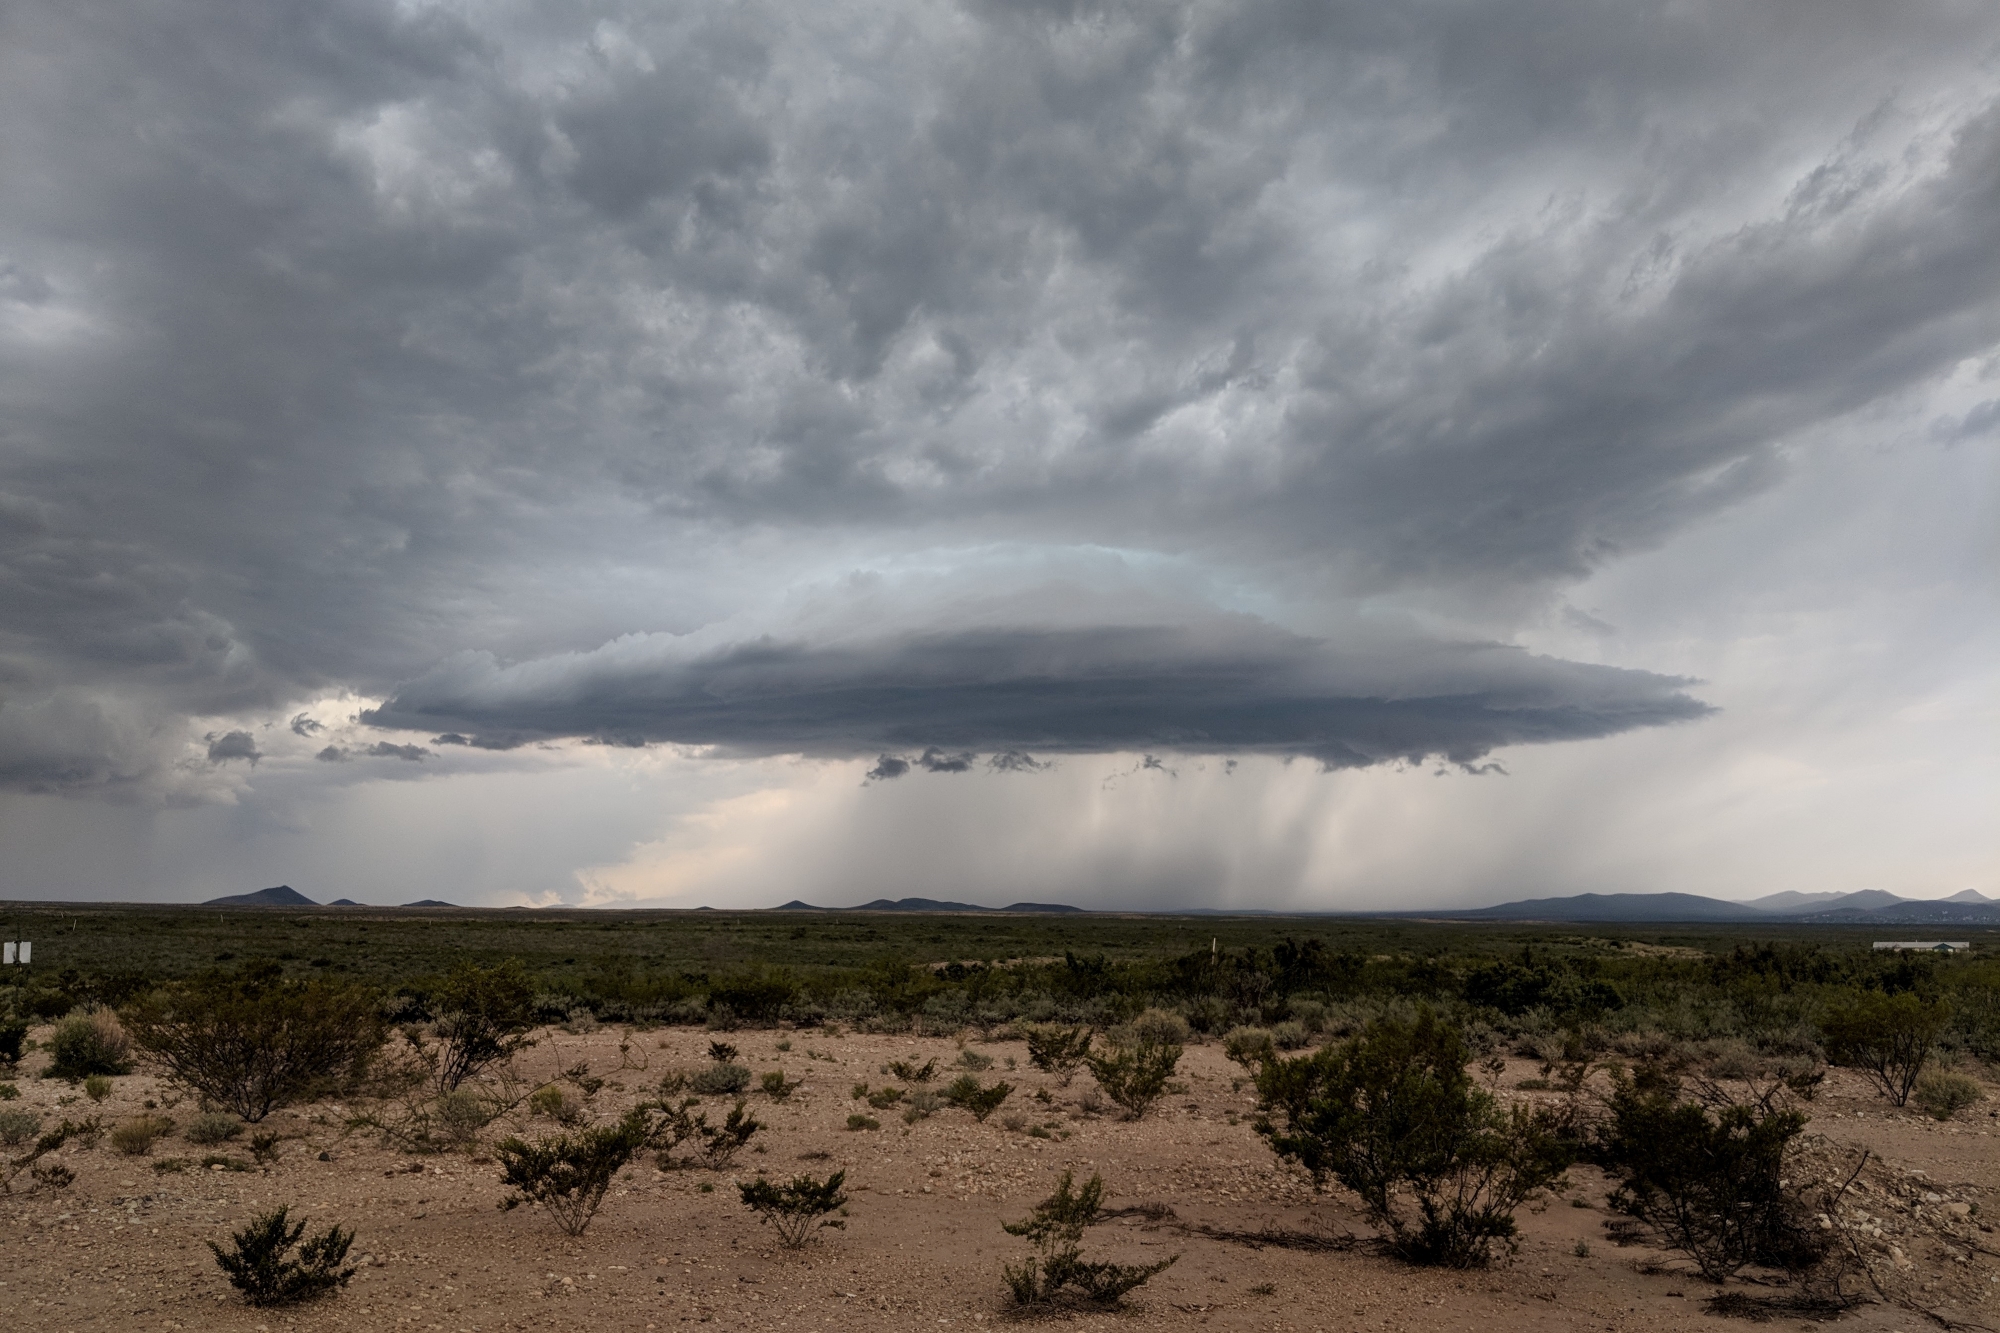 A storm cloud brought by the North American monsoon hangs over the desert near Tombstone, Arizona.